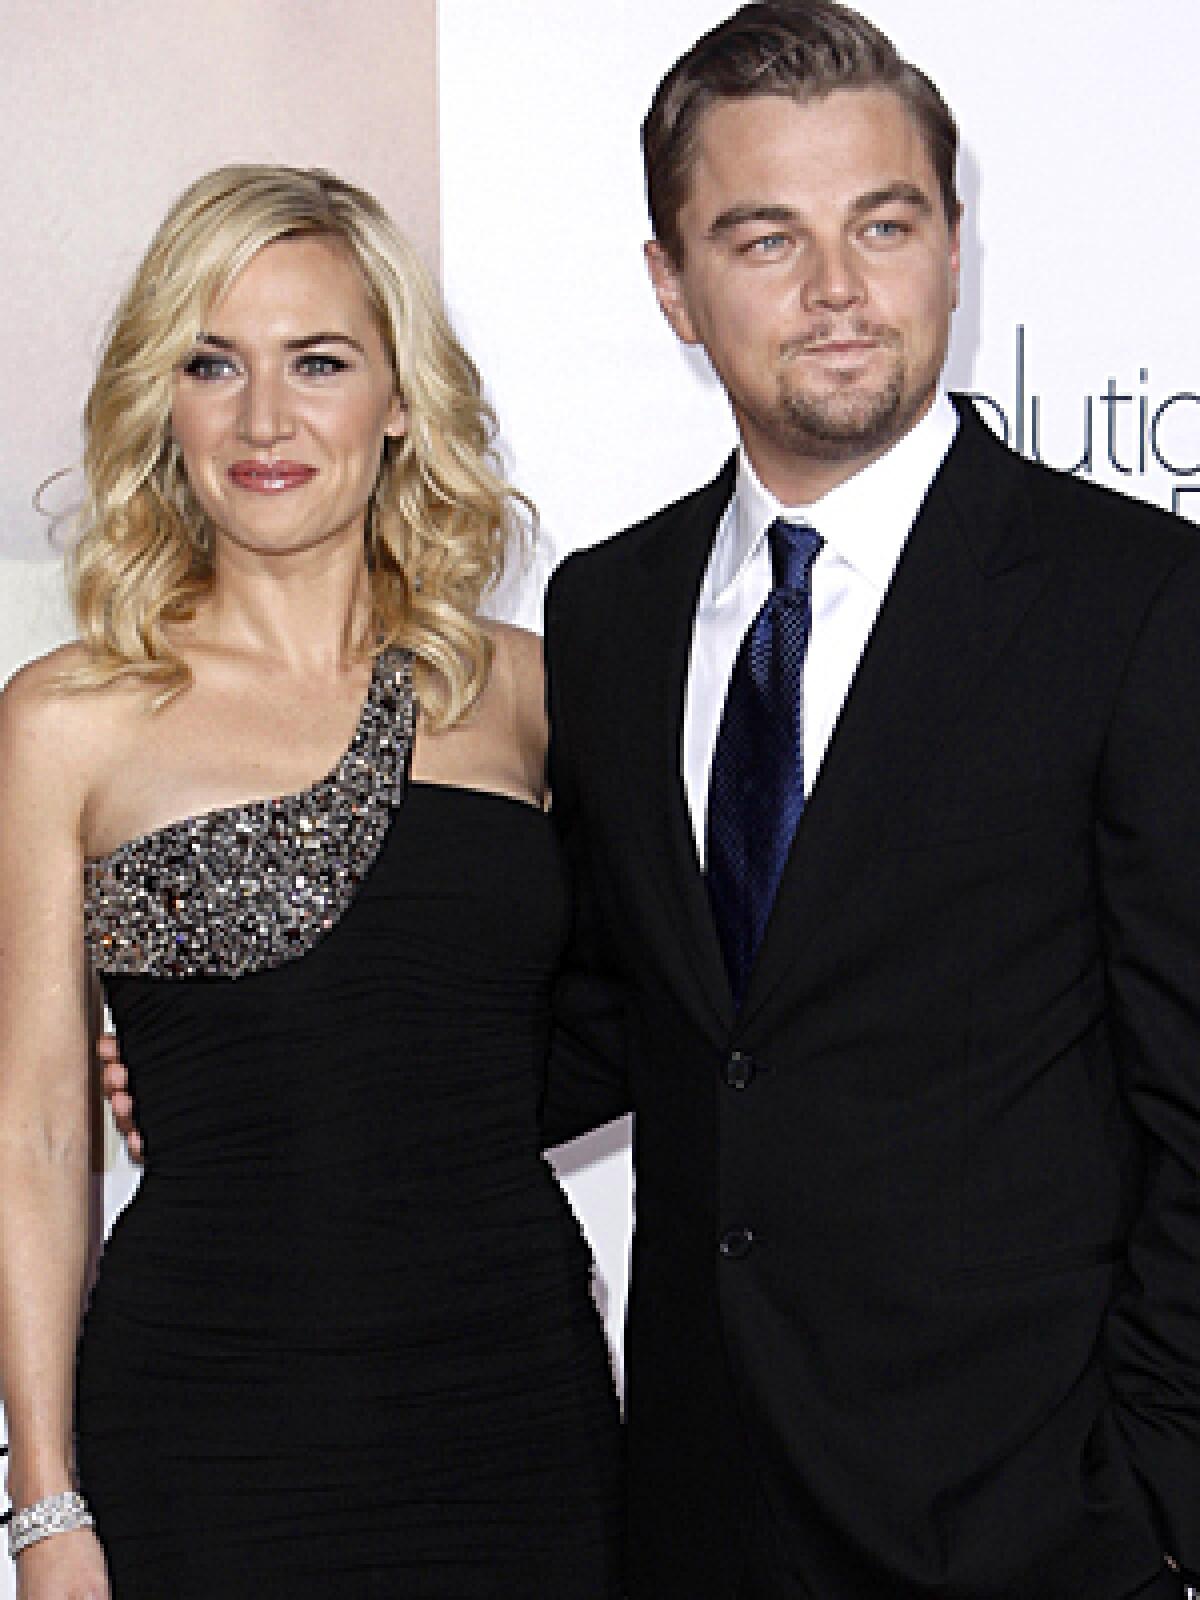 This year's glamour quotient is notable, even for the Globes, including Leonardo DiCaprio and Kate Winslet, pictured at the Los Angeles premiere of "Revolutionary Road."